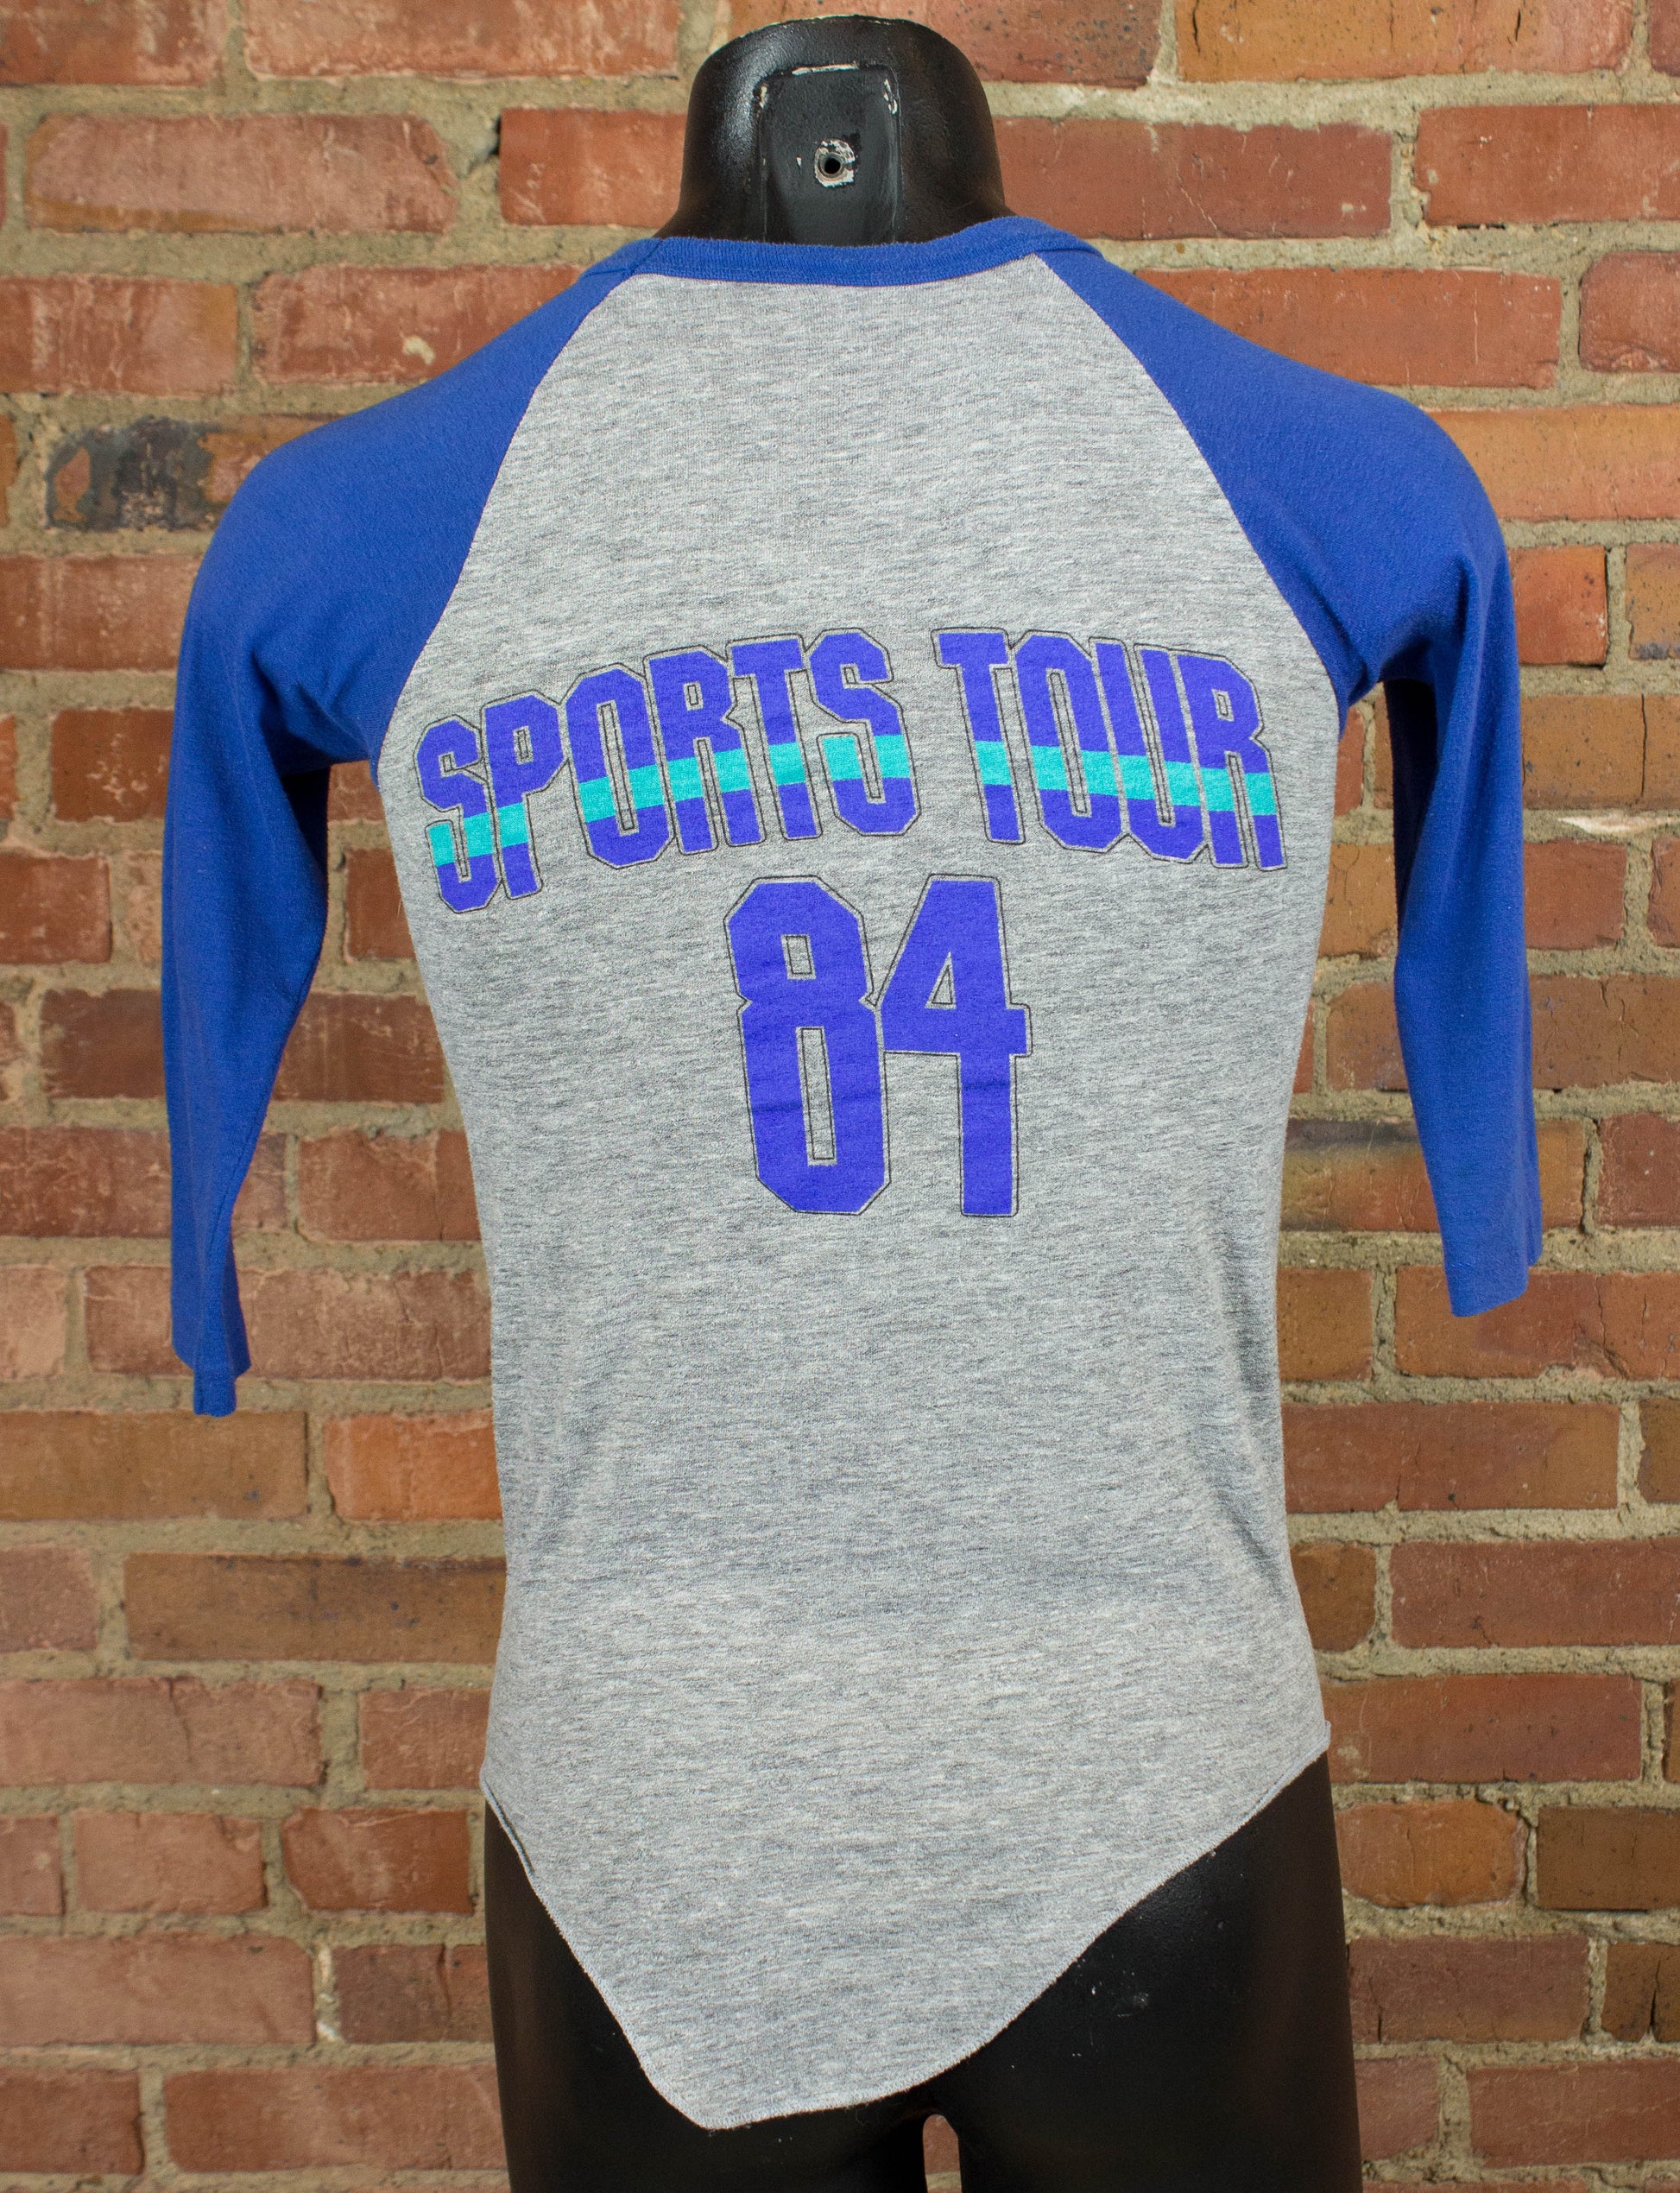 Vintage Huey Lewis and the News Concert T Shirt 1984 Sports Tour Grey and Blue Raglan Jersey XS